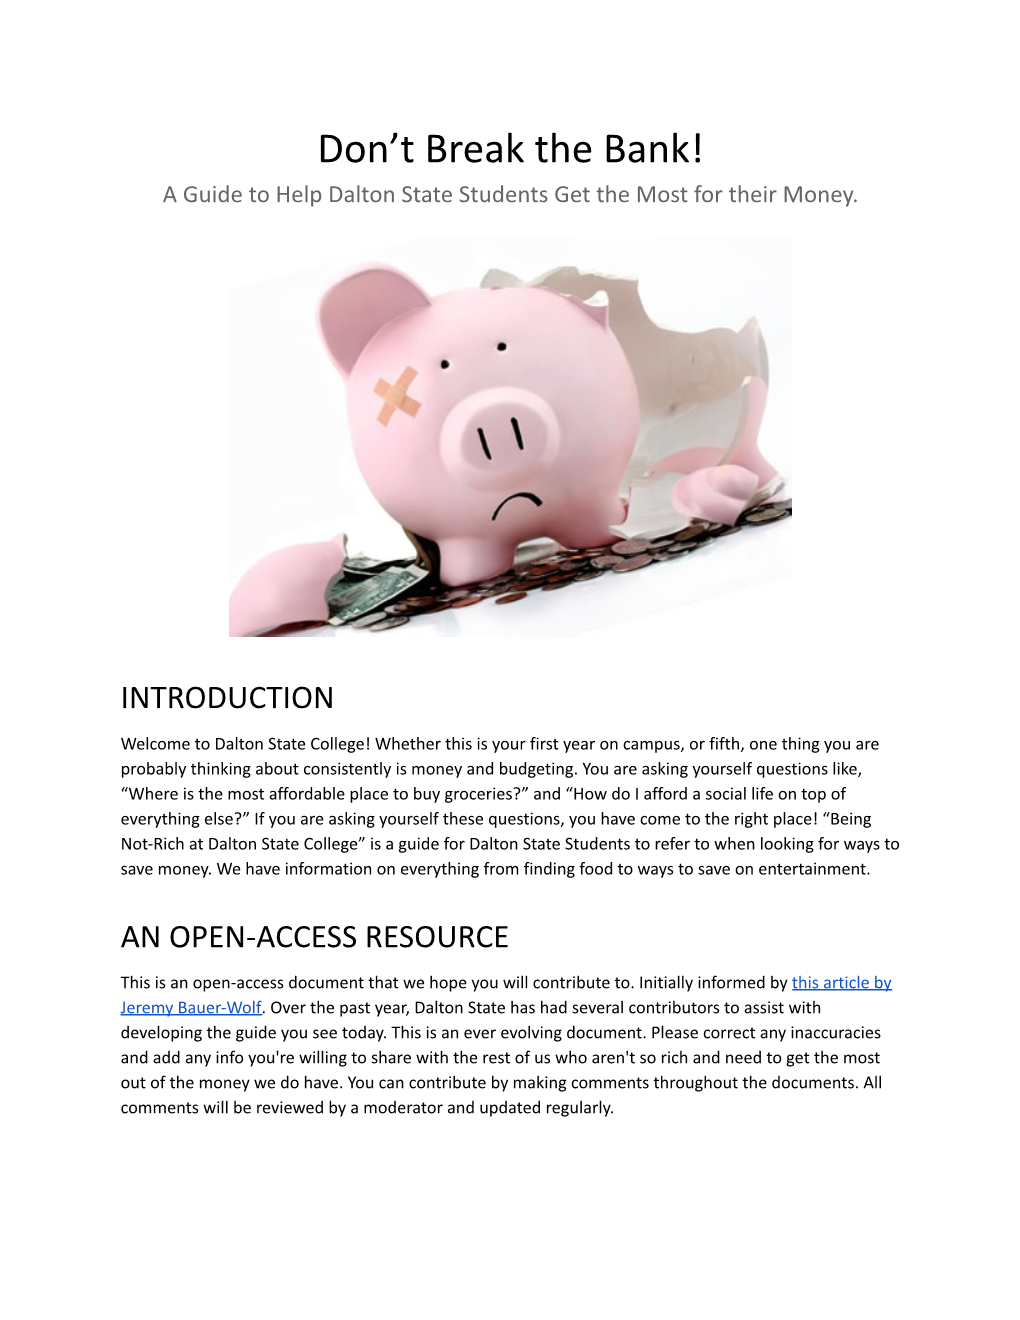 Don't Break the Bank! a Guide to Help DS Students Get the Most for Their